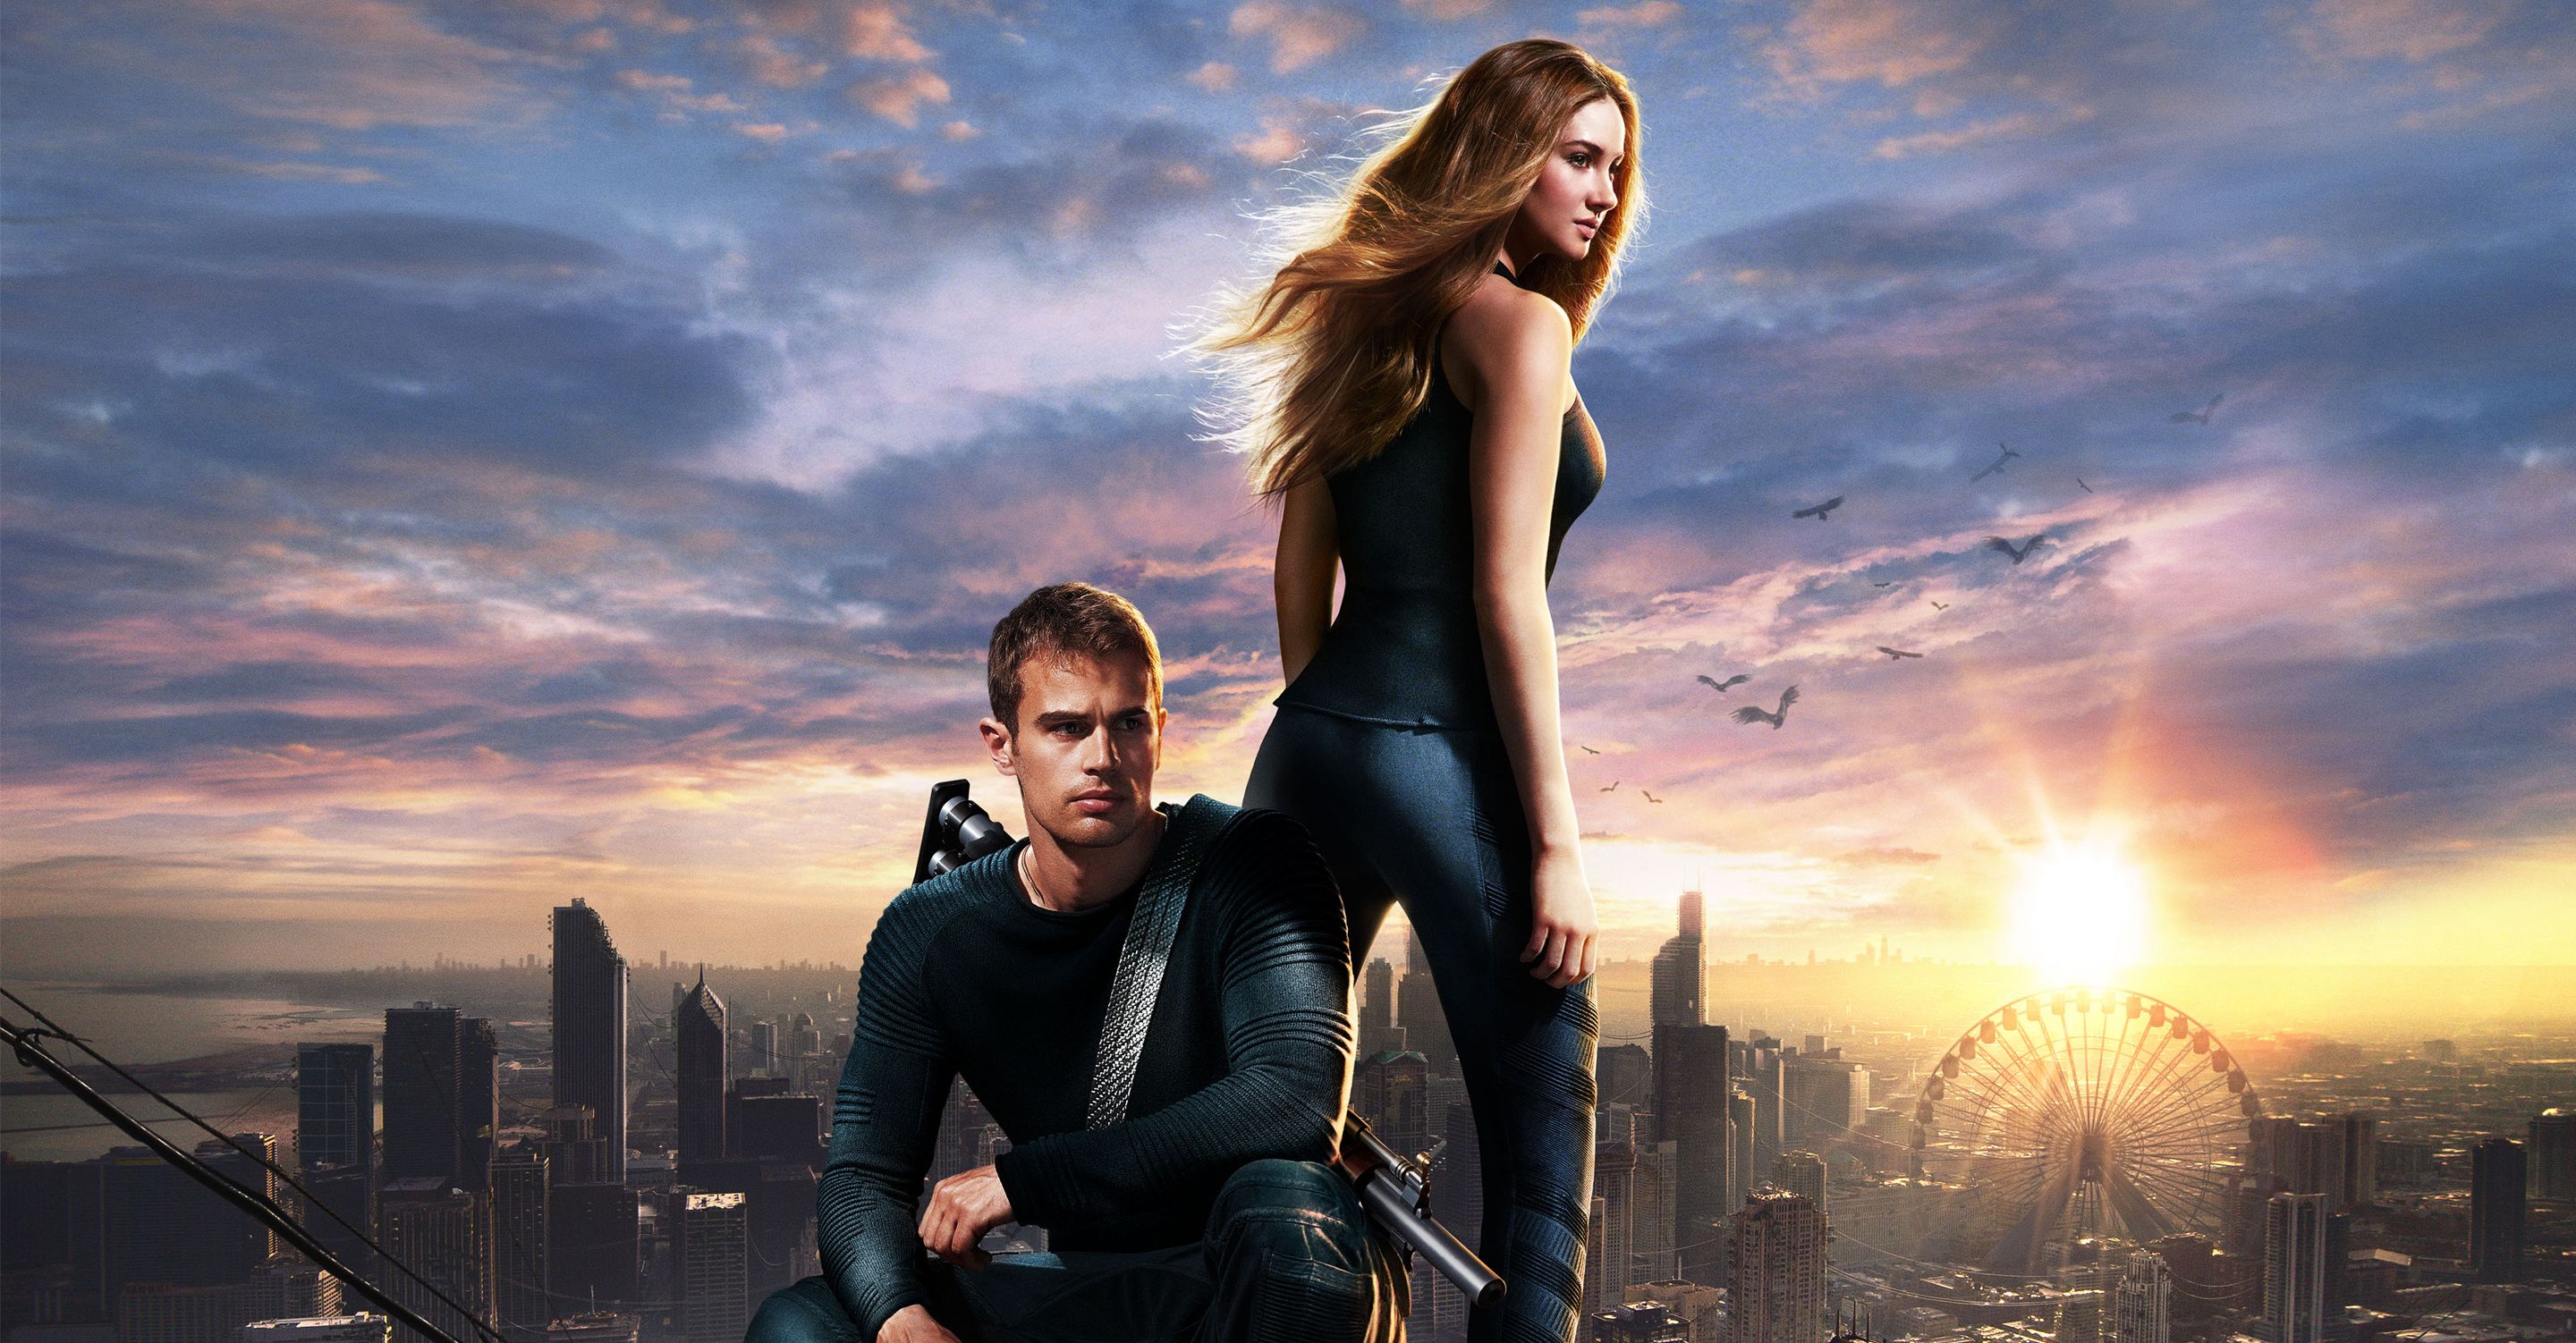 Box Office: Divergent rules whilst The Muppets see a significant decline